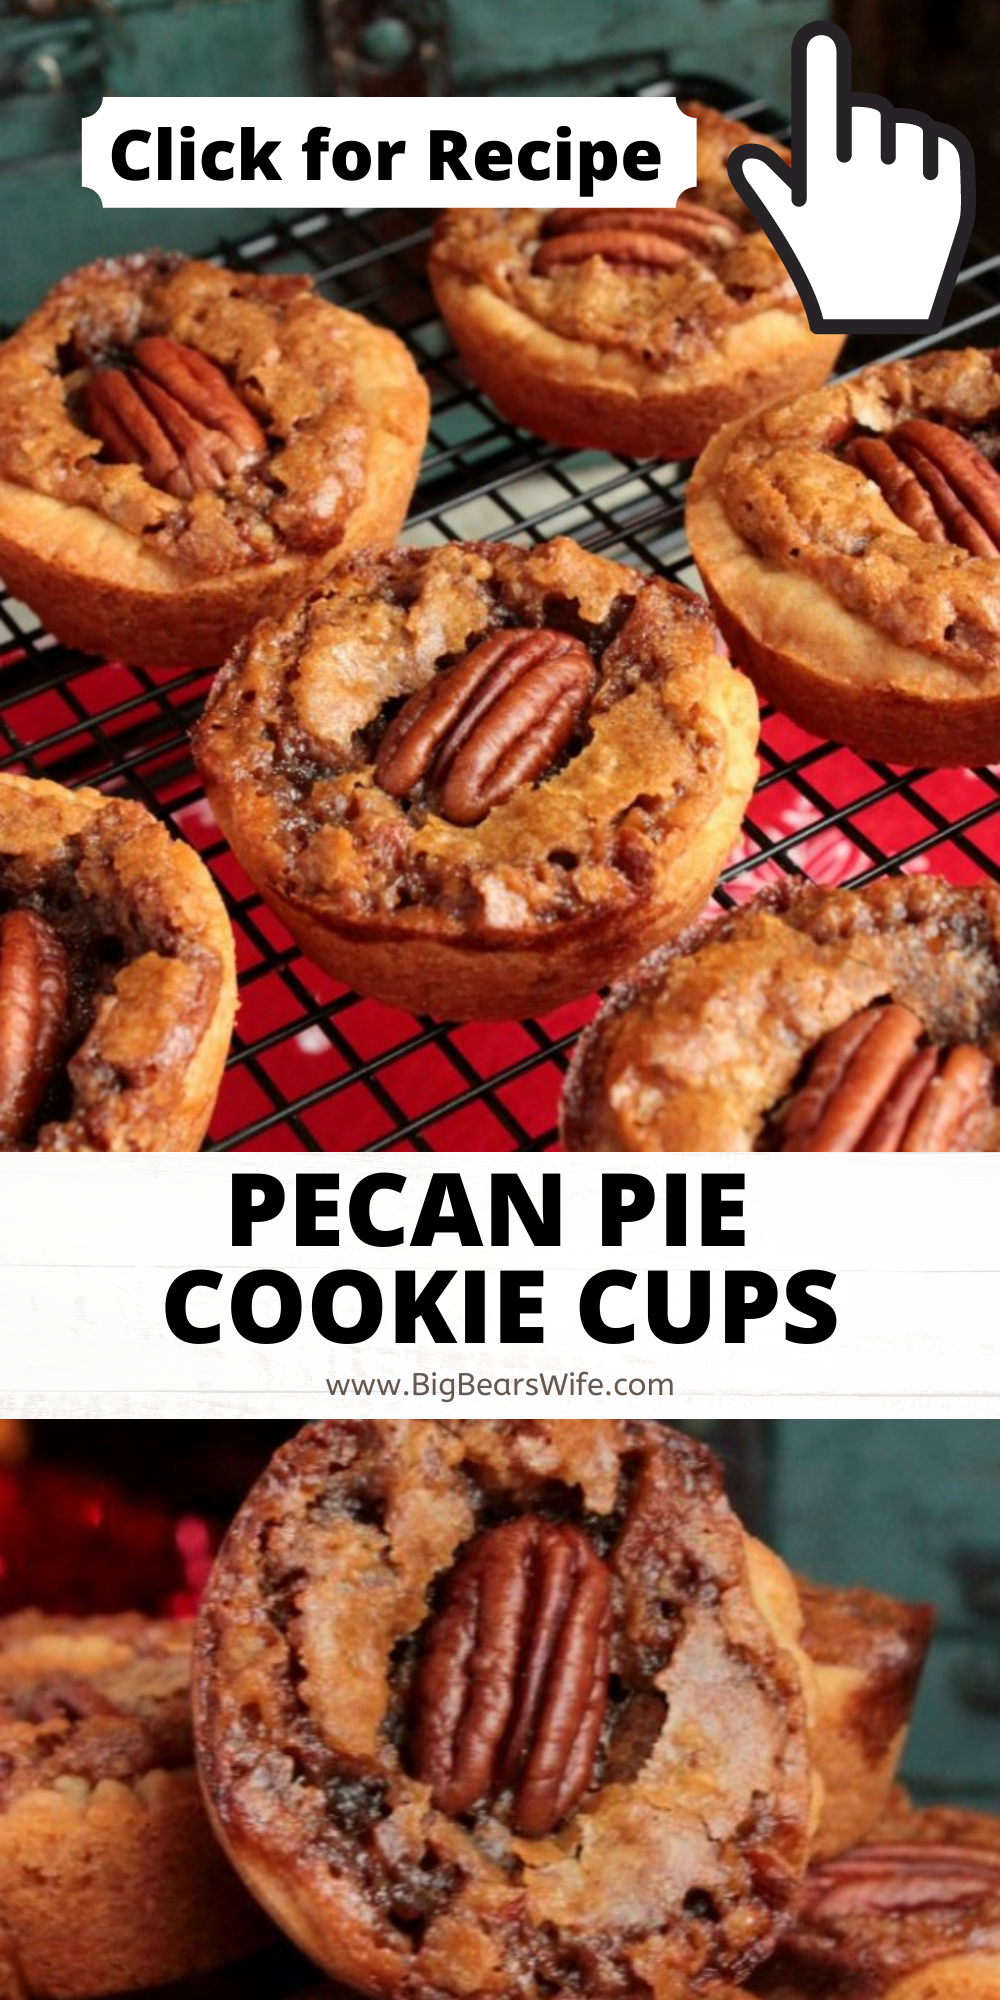 These Pecan Pie Cookie Cups have a sweet pecan pie filling baked inside of a sugar cookie crust to create the perfect mini pecan pie dessert for your next holiday party! via @bigbearswife